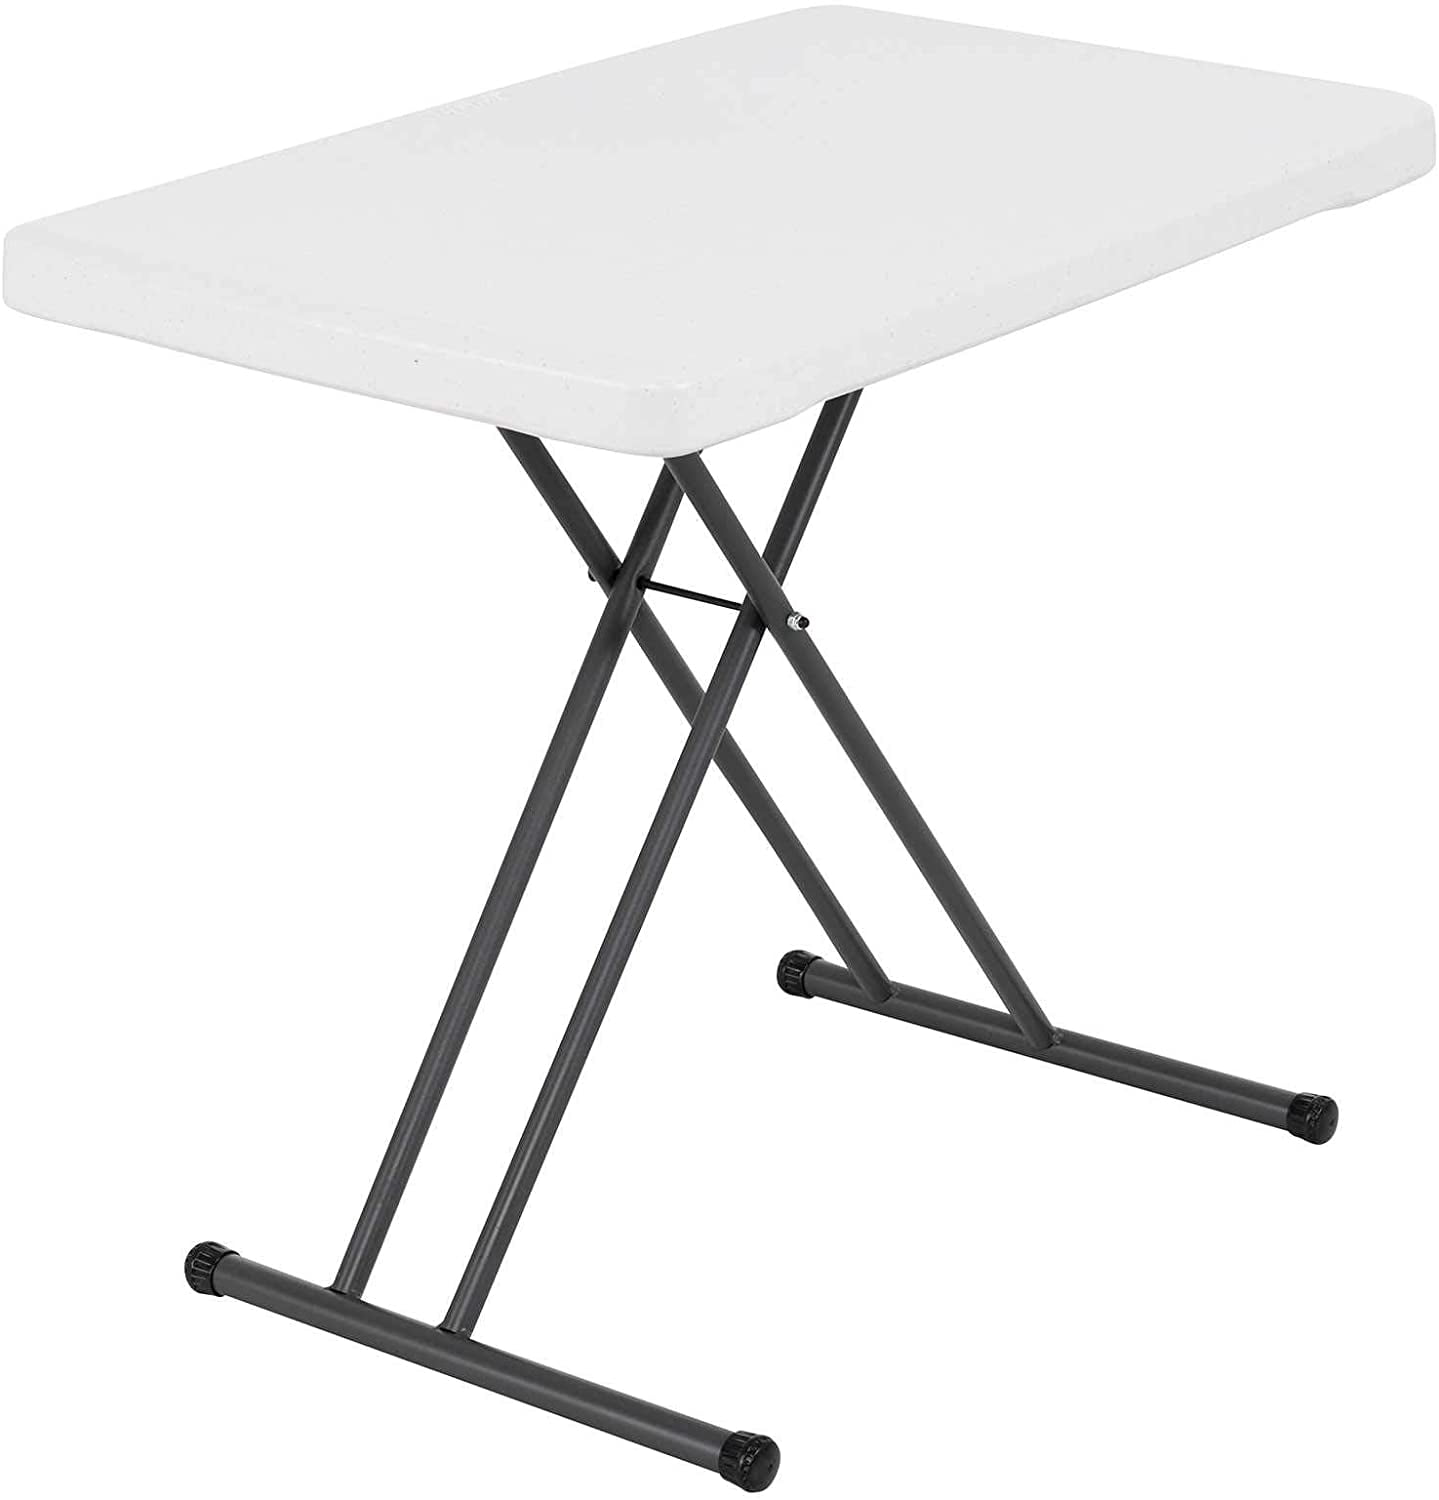 Folding Table 3ft Aluminum Frame MDF Table Top BBQ Adjustable Height 37cm 67cm 